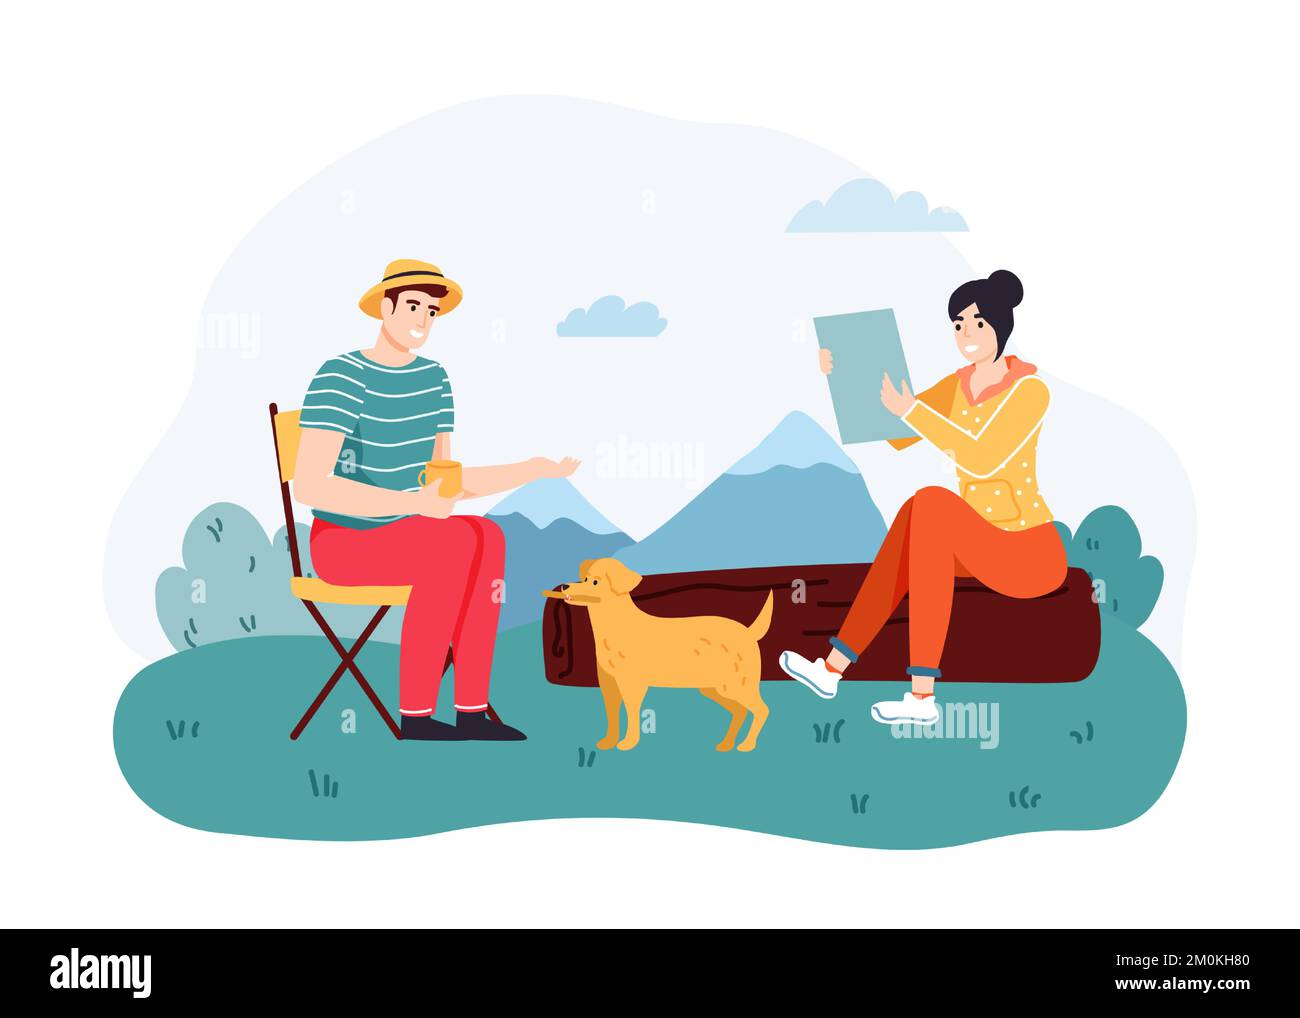 People traveling or hiking on nature. Man sitting on chair outdoor drinking hot beverage and playing with dog pet Stock Vector